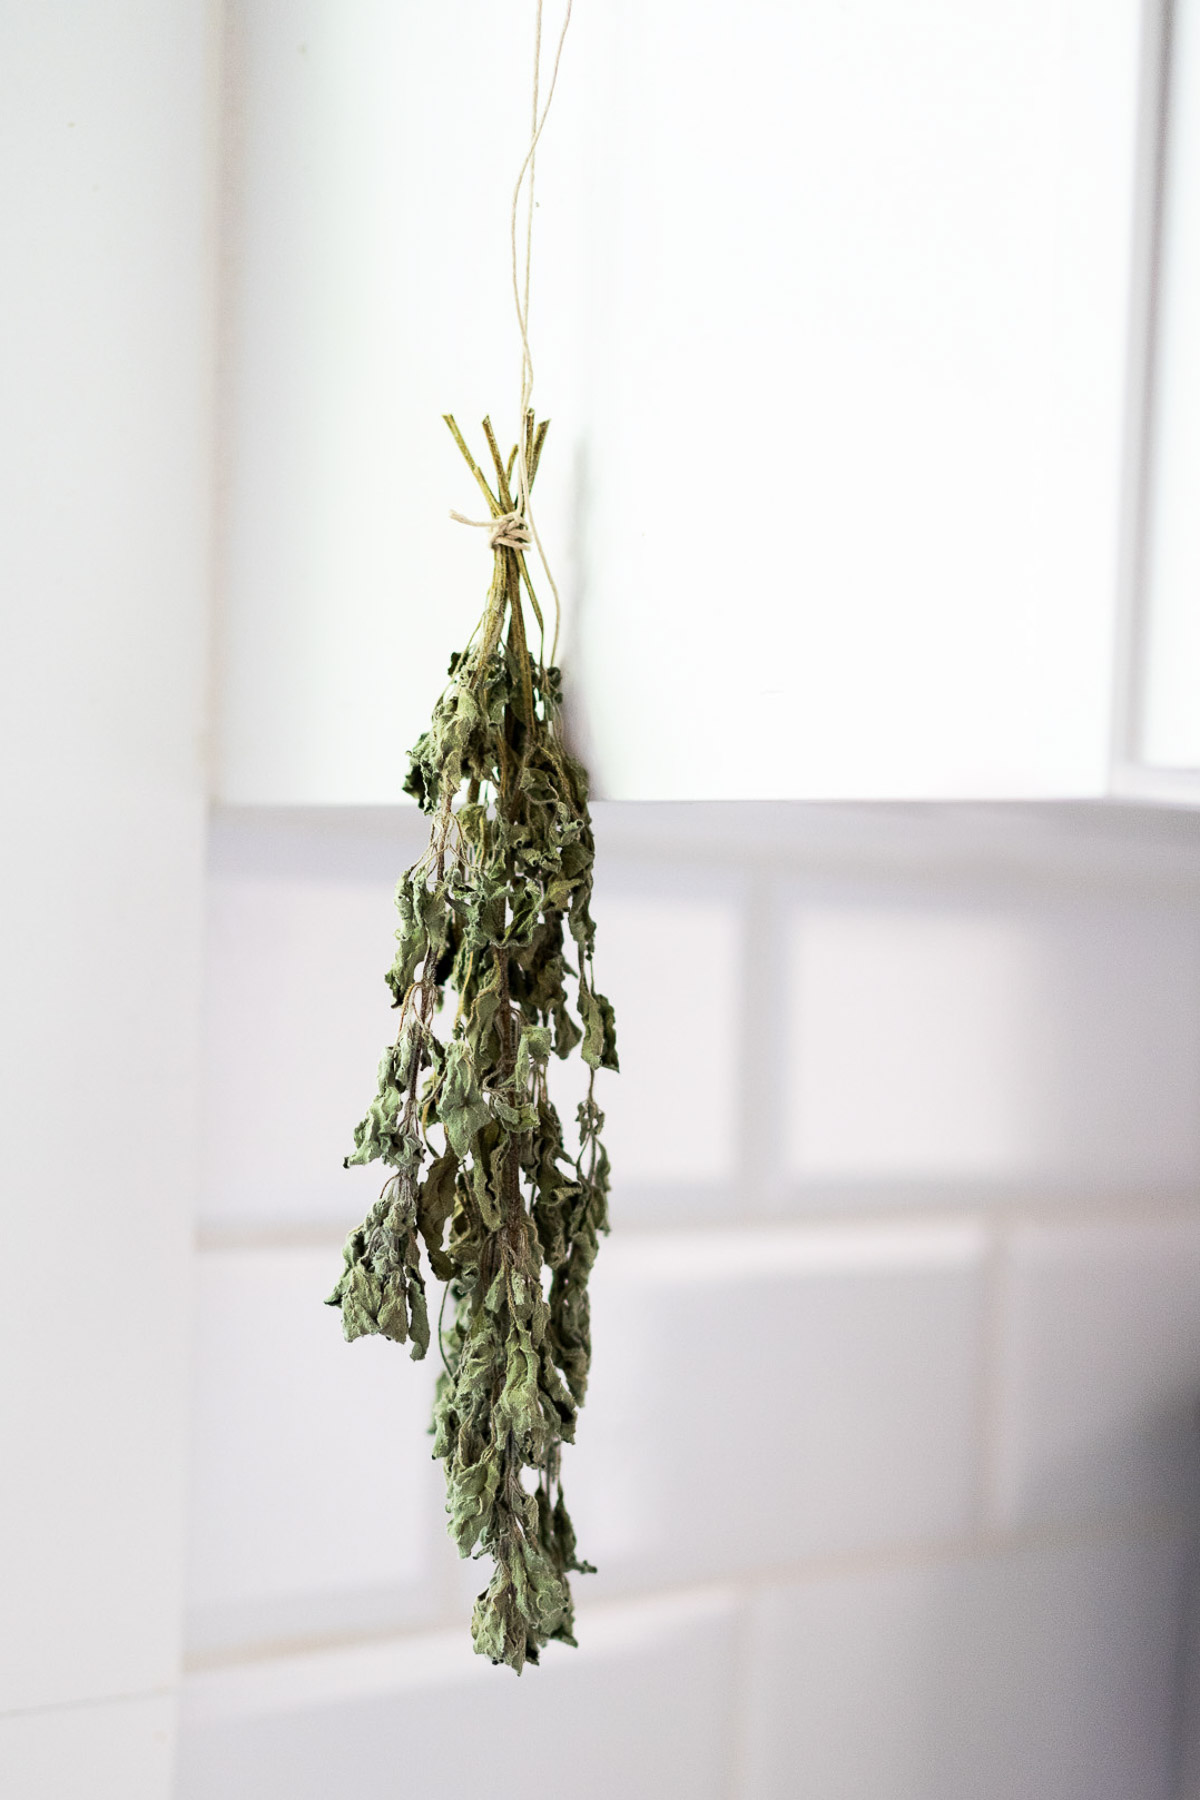 Hanging Herbs for Drying - How to Dry Fresh Herbs